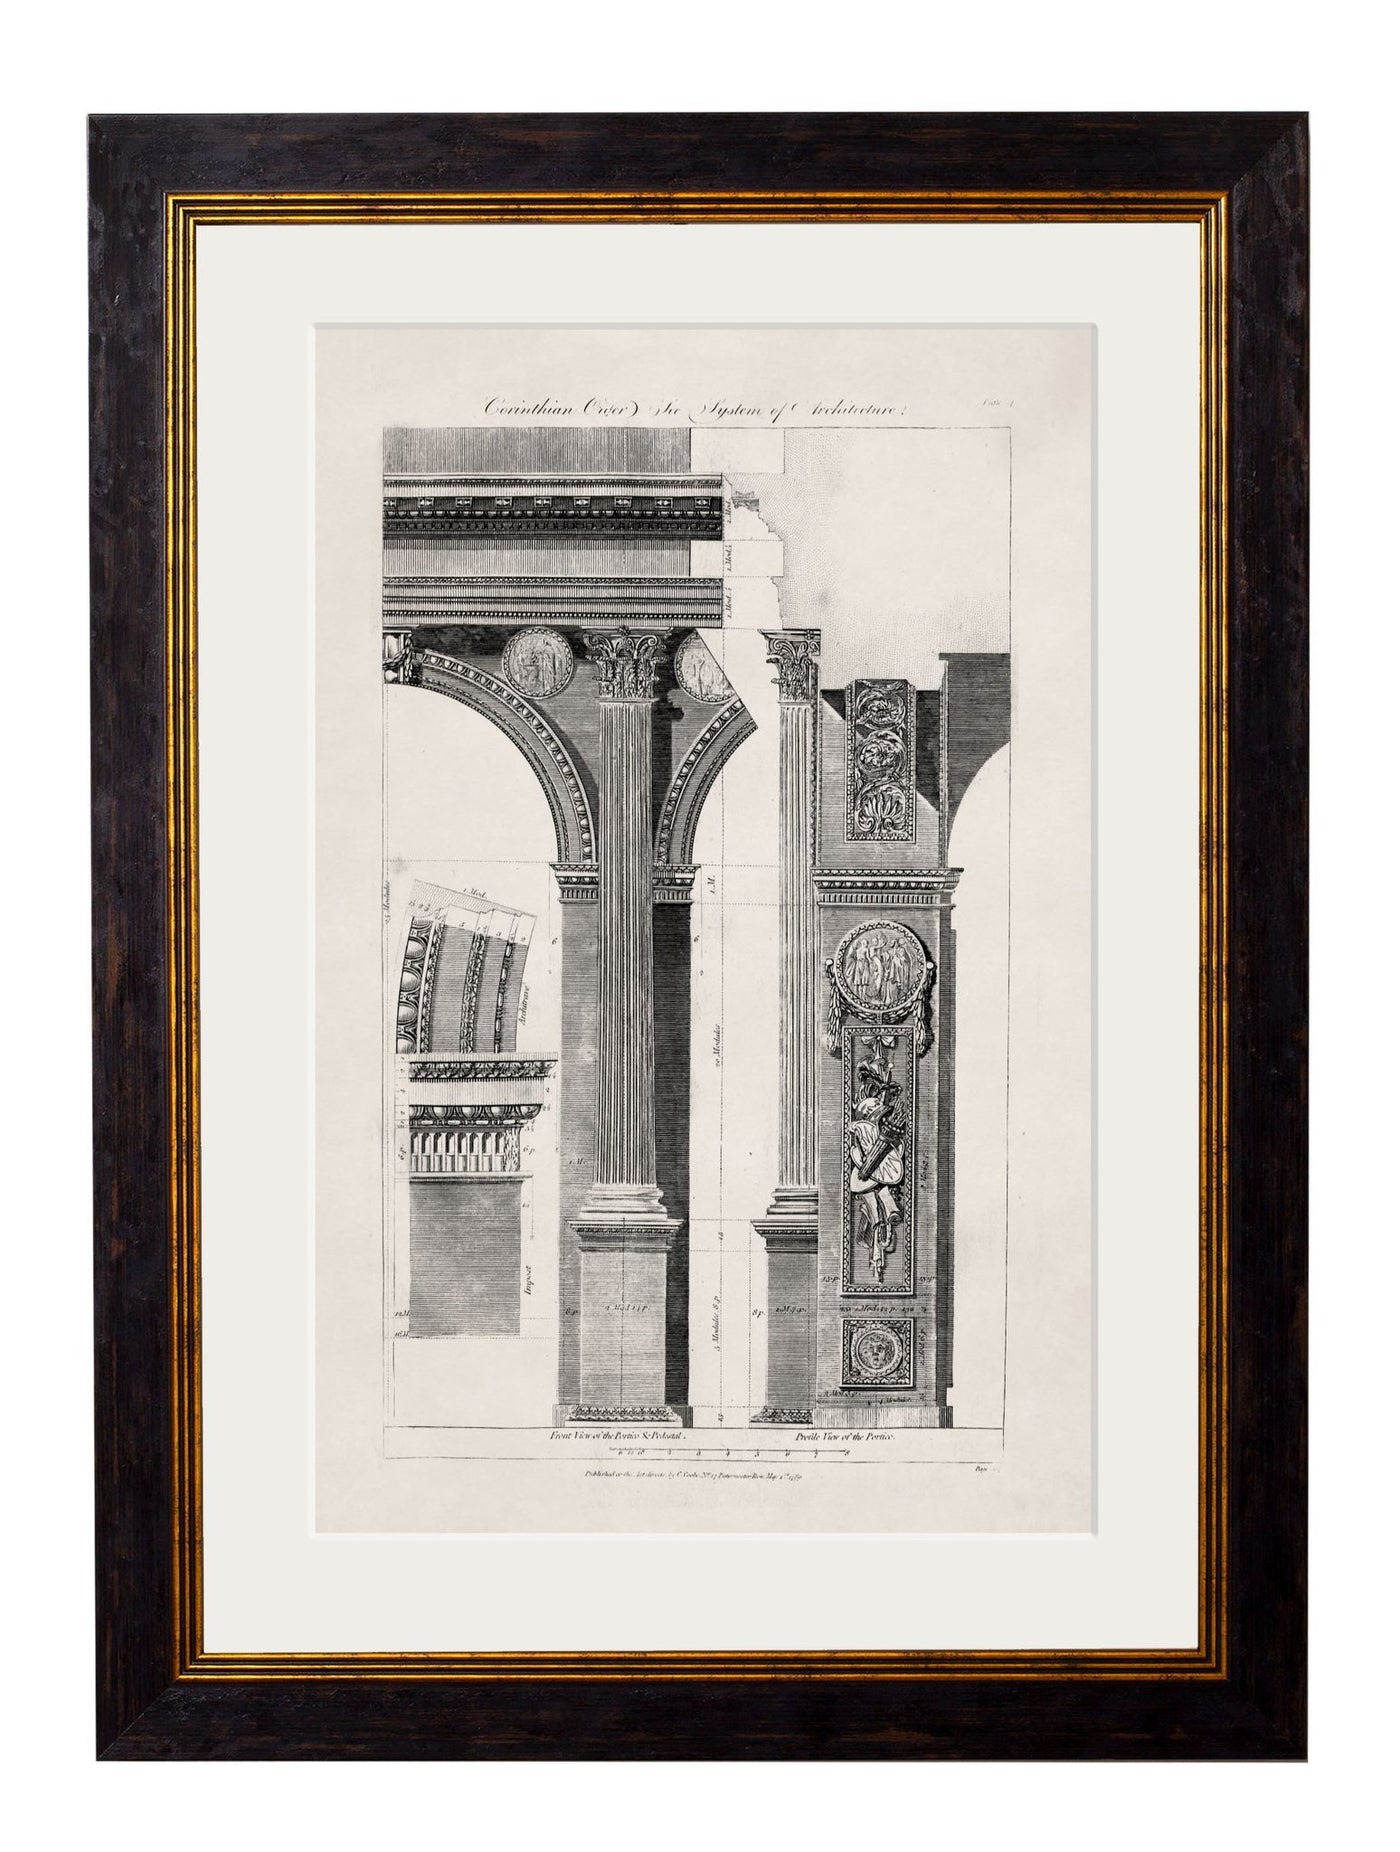 C.1796 ARCHITECTURAL STUDIES OF ARCHES - TheArtistsQuarter